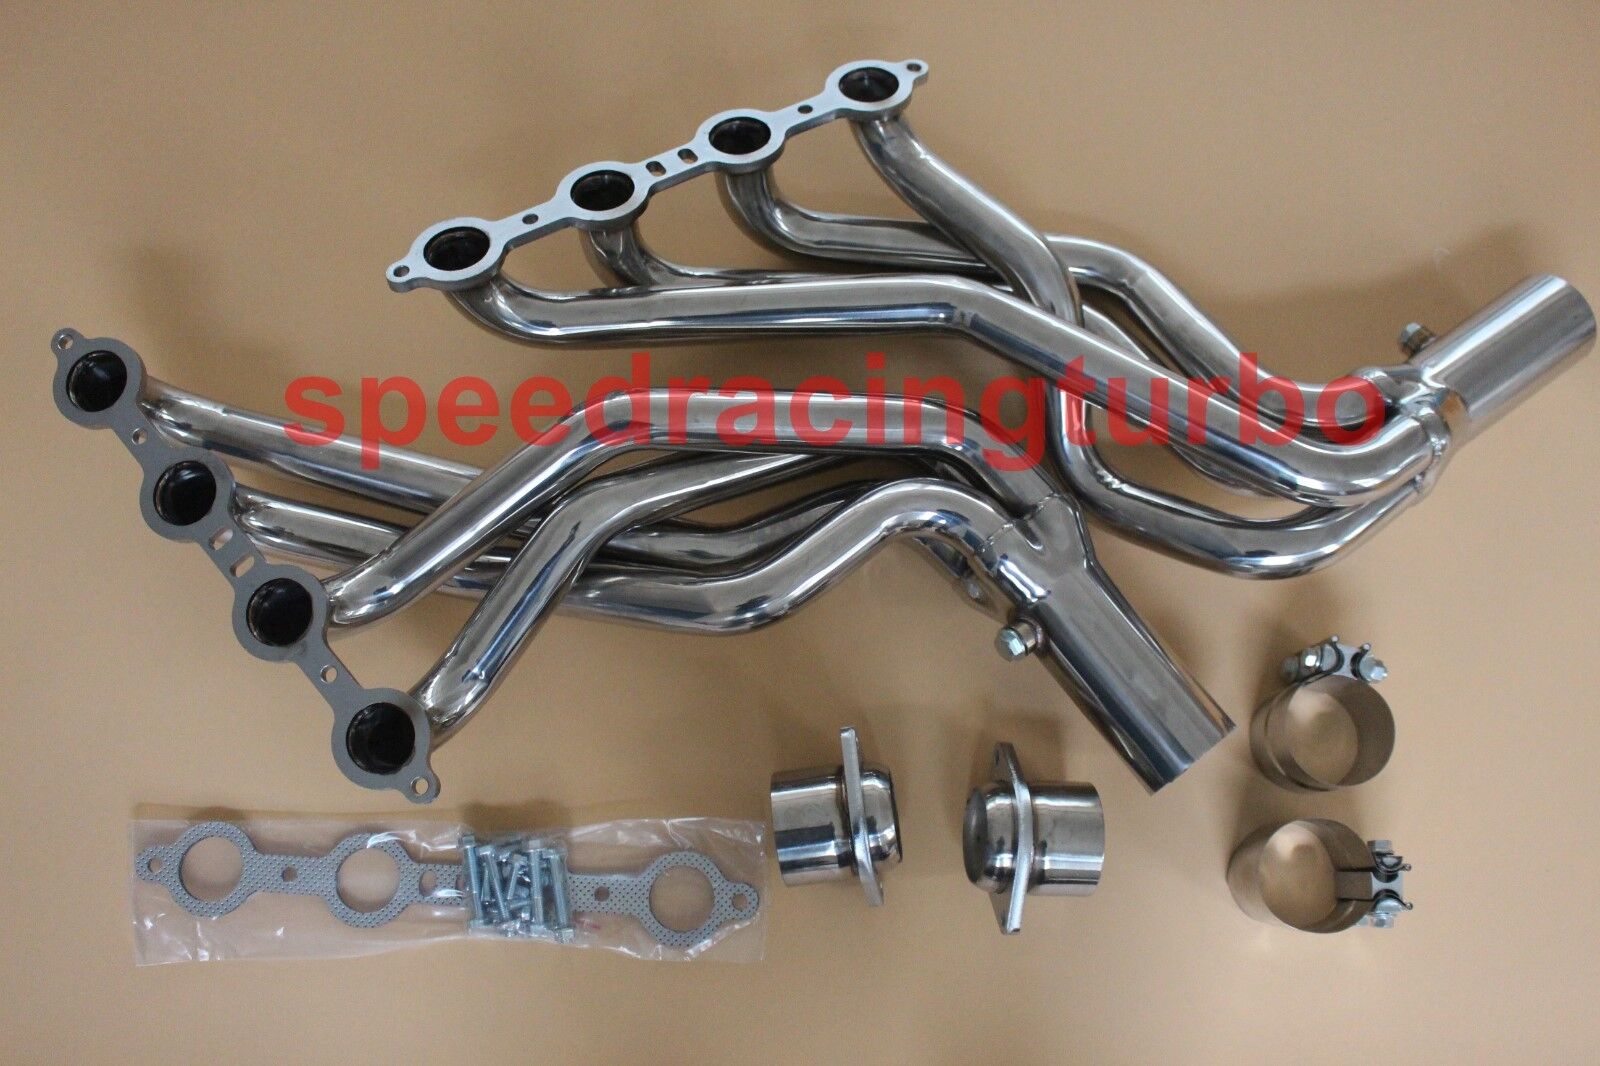 EXHAUST HEADER FOR 2004-2007 CADILLAC CTS-V 5.7L 6.0L V8 LS6 LS2 STAINLESS STEEL